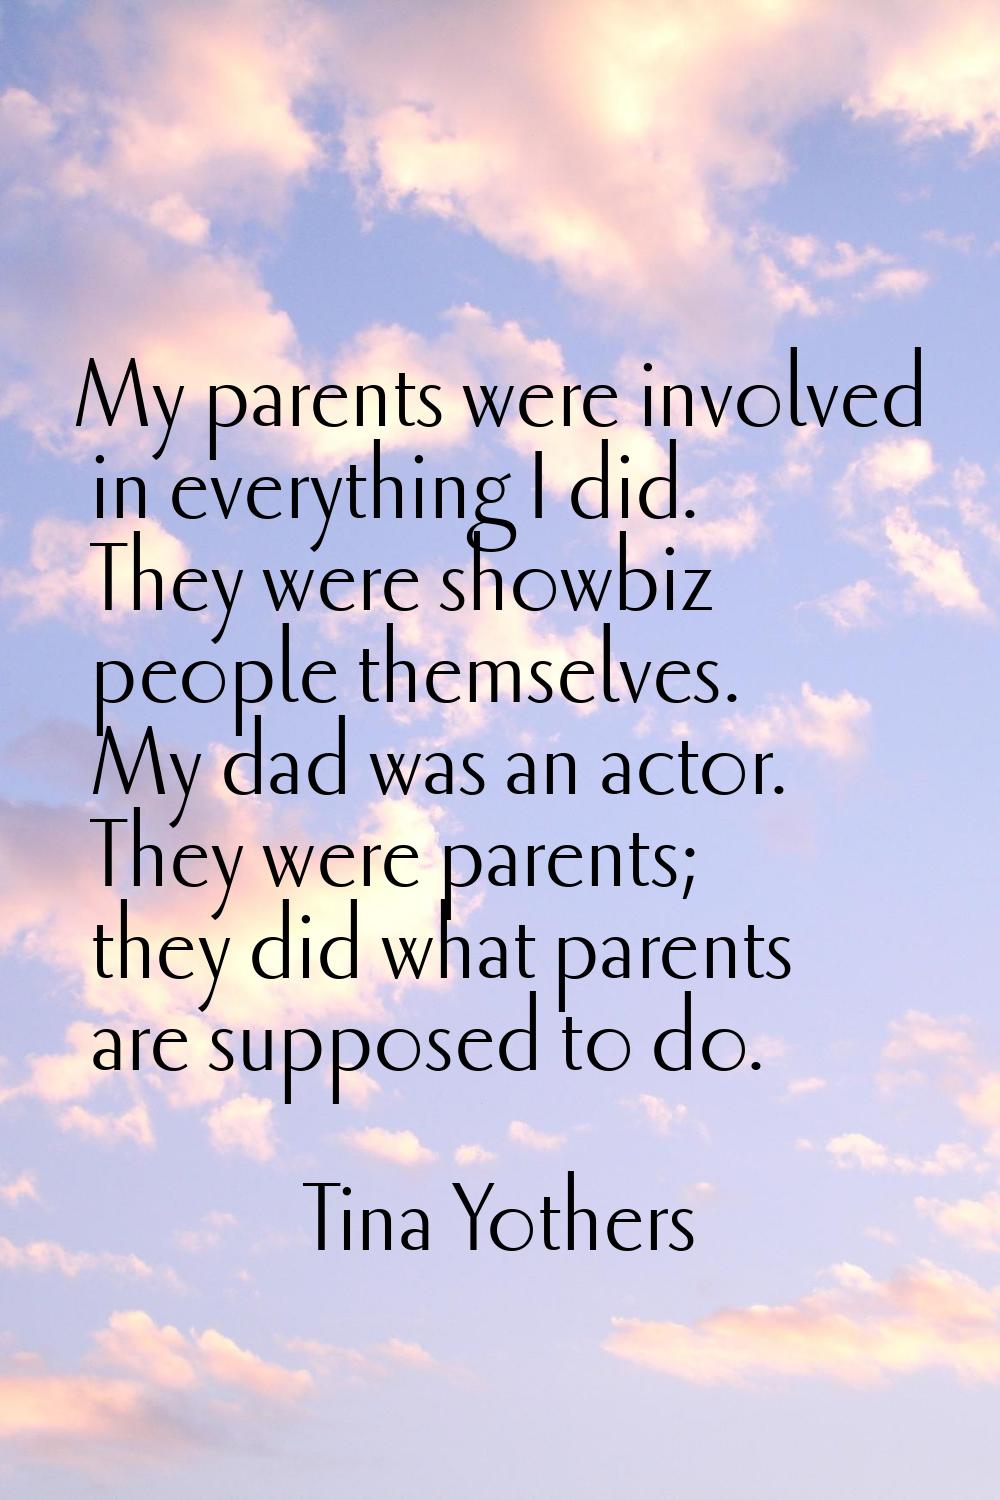 My parents were involved in everything I did. They were showbiz people themselves. My dad was an ac